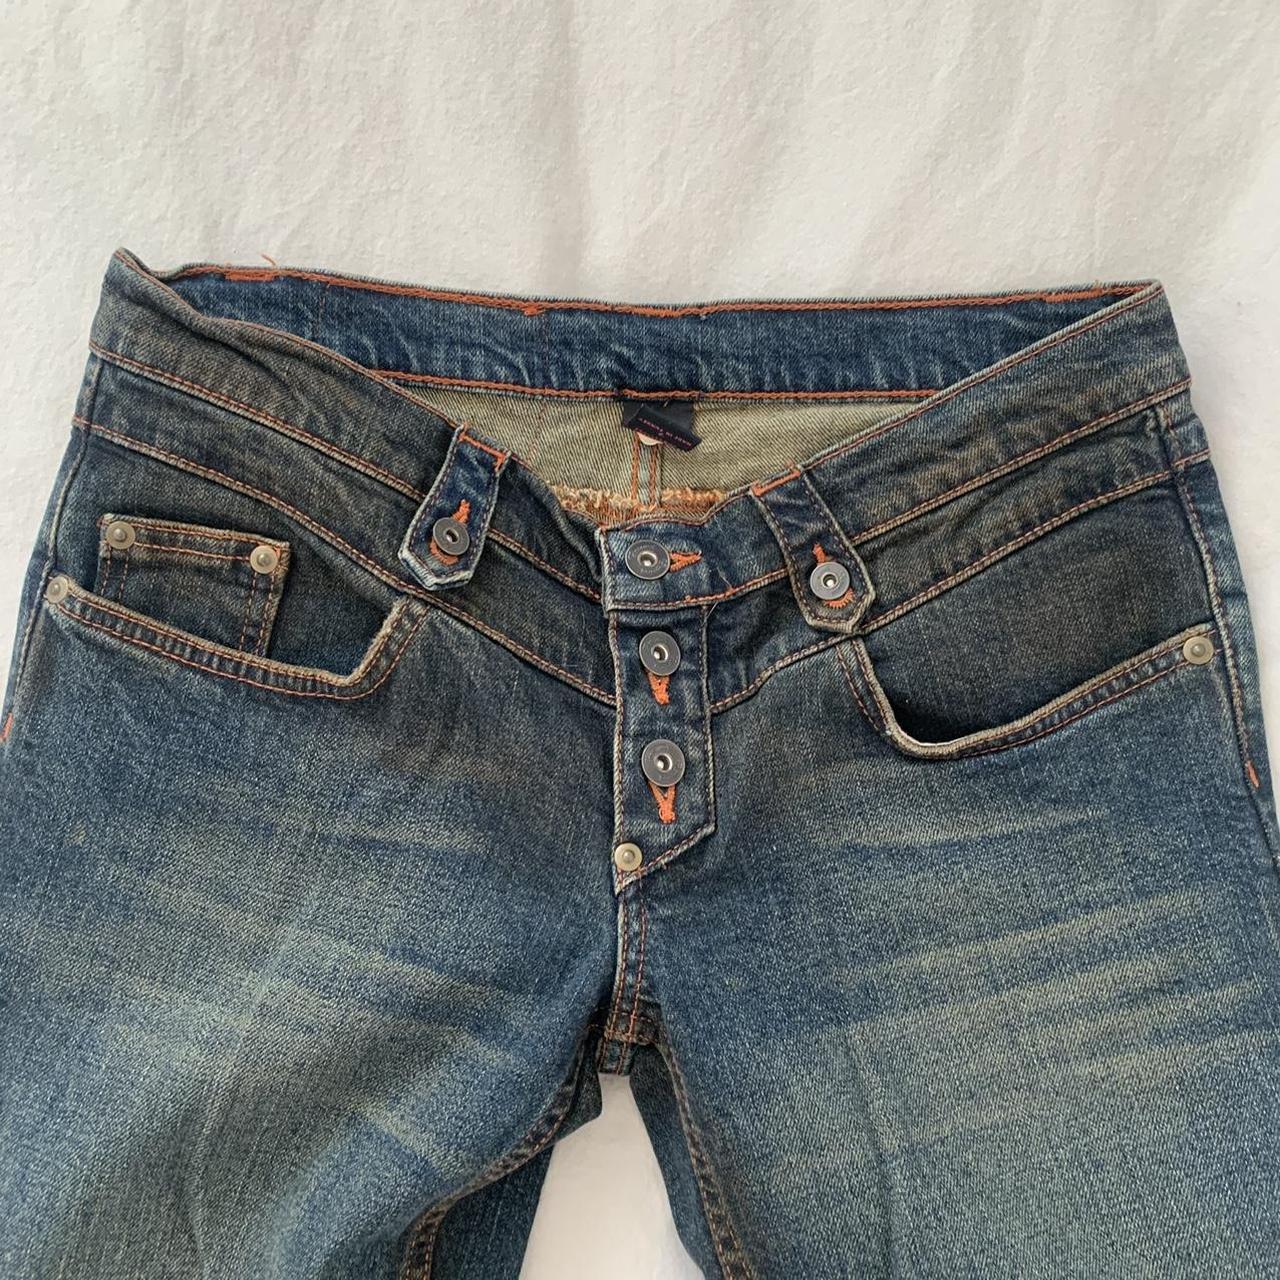 Vintage Fiorucci distressed low - with... rise Depop jeans